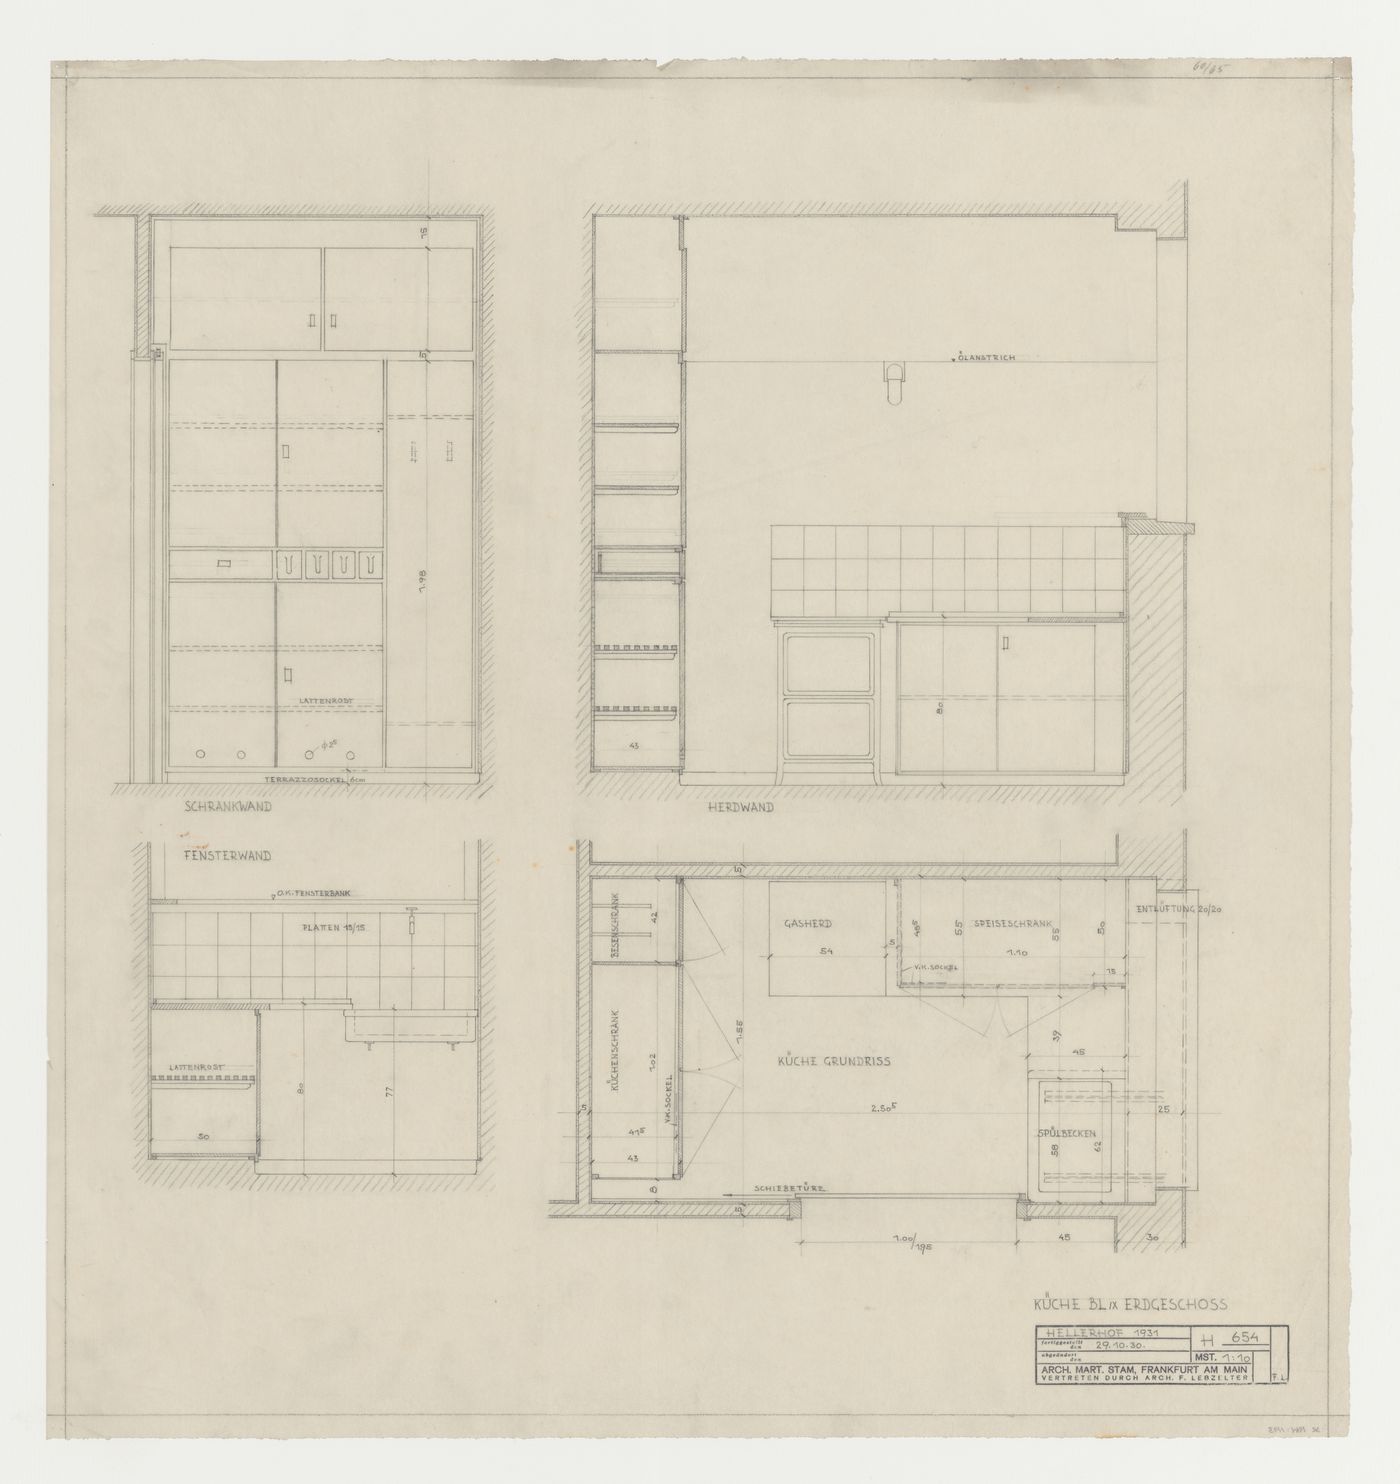 Ground floor plan and elevations for a kitchen for a housing unit for Block IX, Hellerhof Housing Estate, Frankfurt am Main, Germany